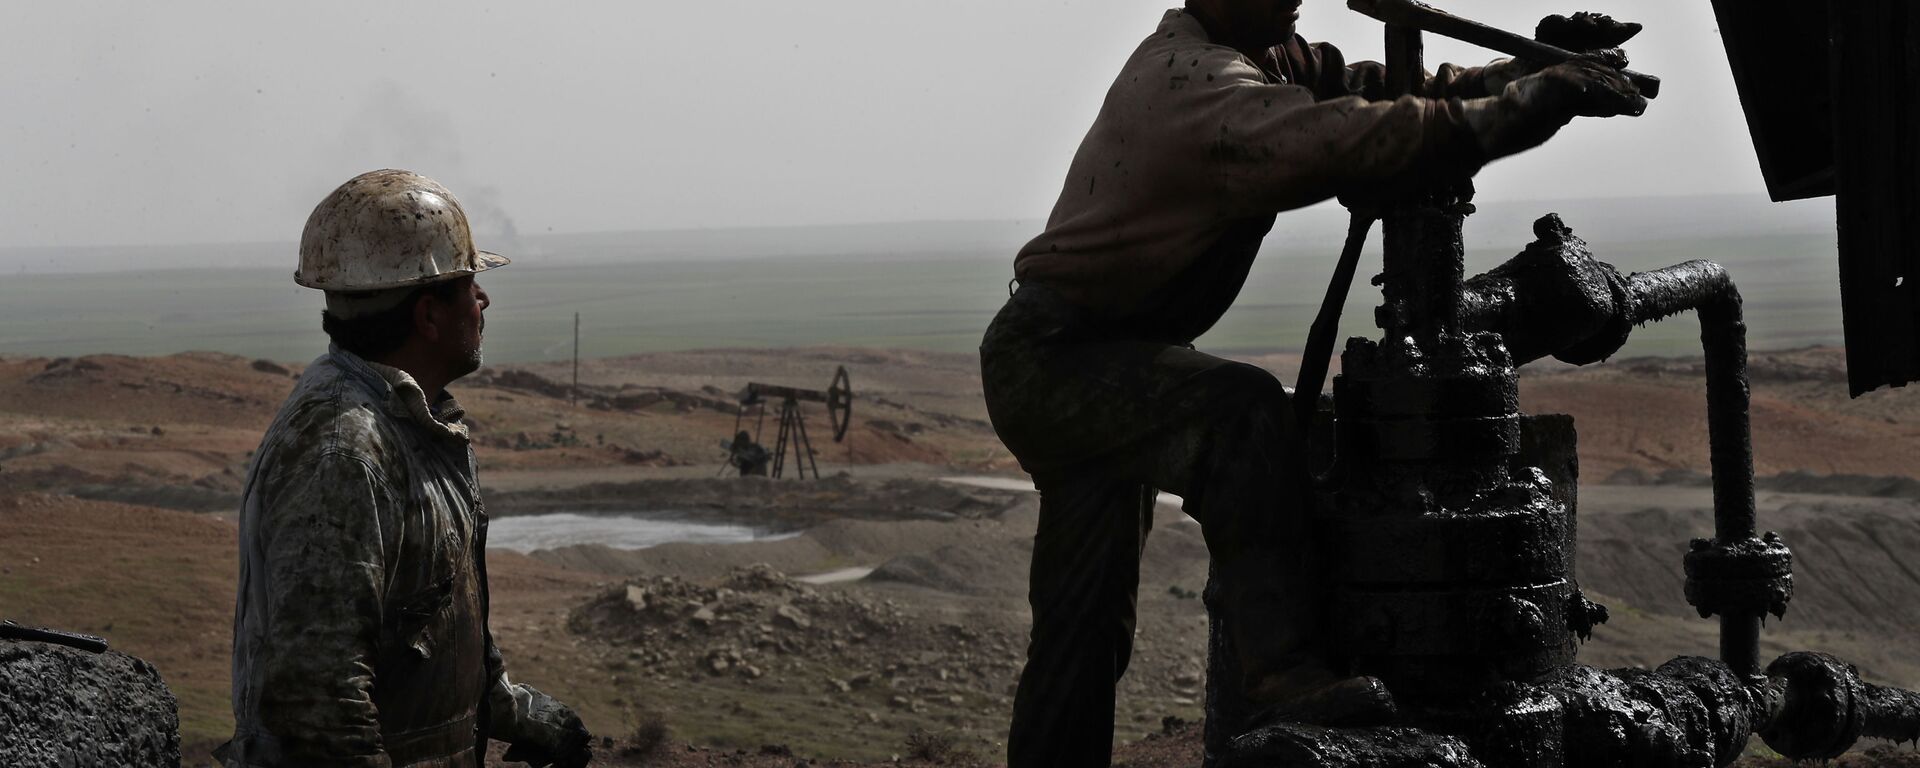 This March 27, 2018 photo shows Syrian workers fixing pipes of an oil well at an oil field controlled by a U.S-backed Kurdish group, in Rmeilan, Hassakeh province, Syria - Sputnik International, 1920, 31.07.2023